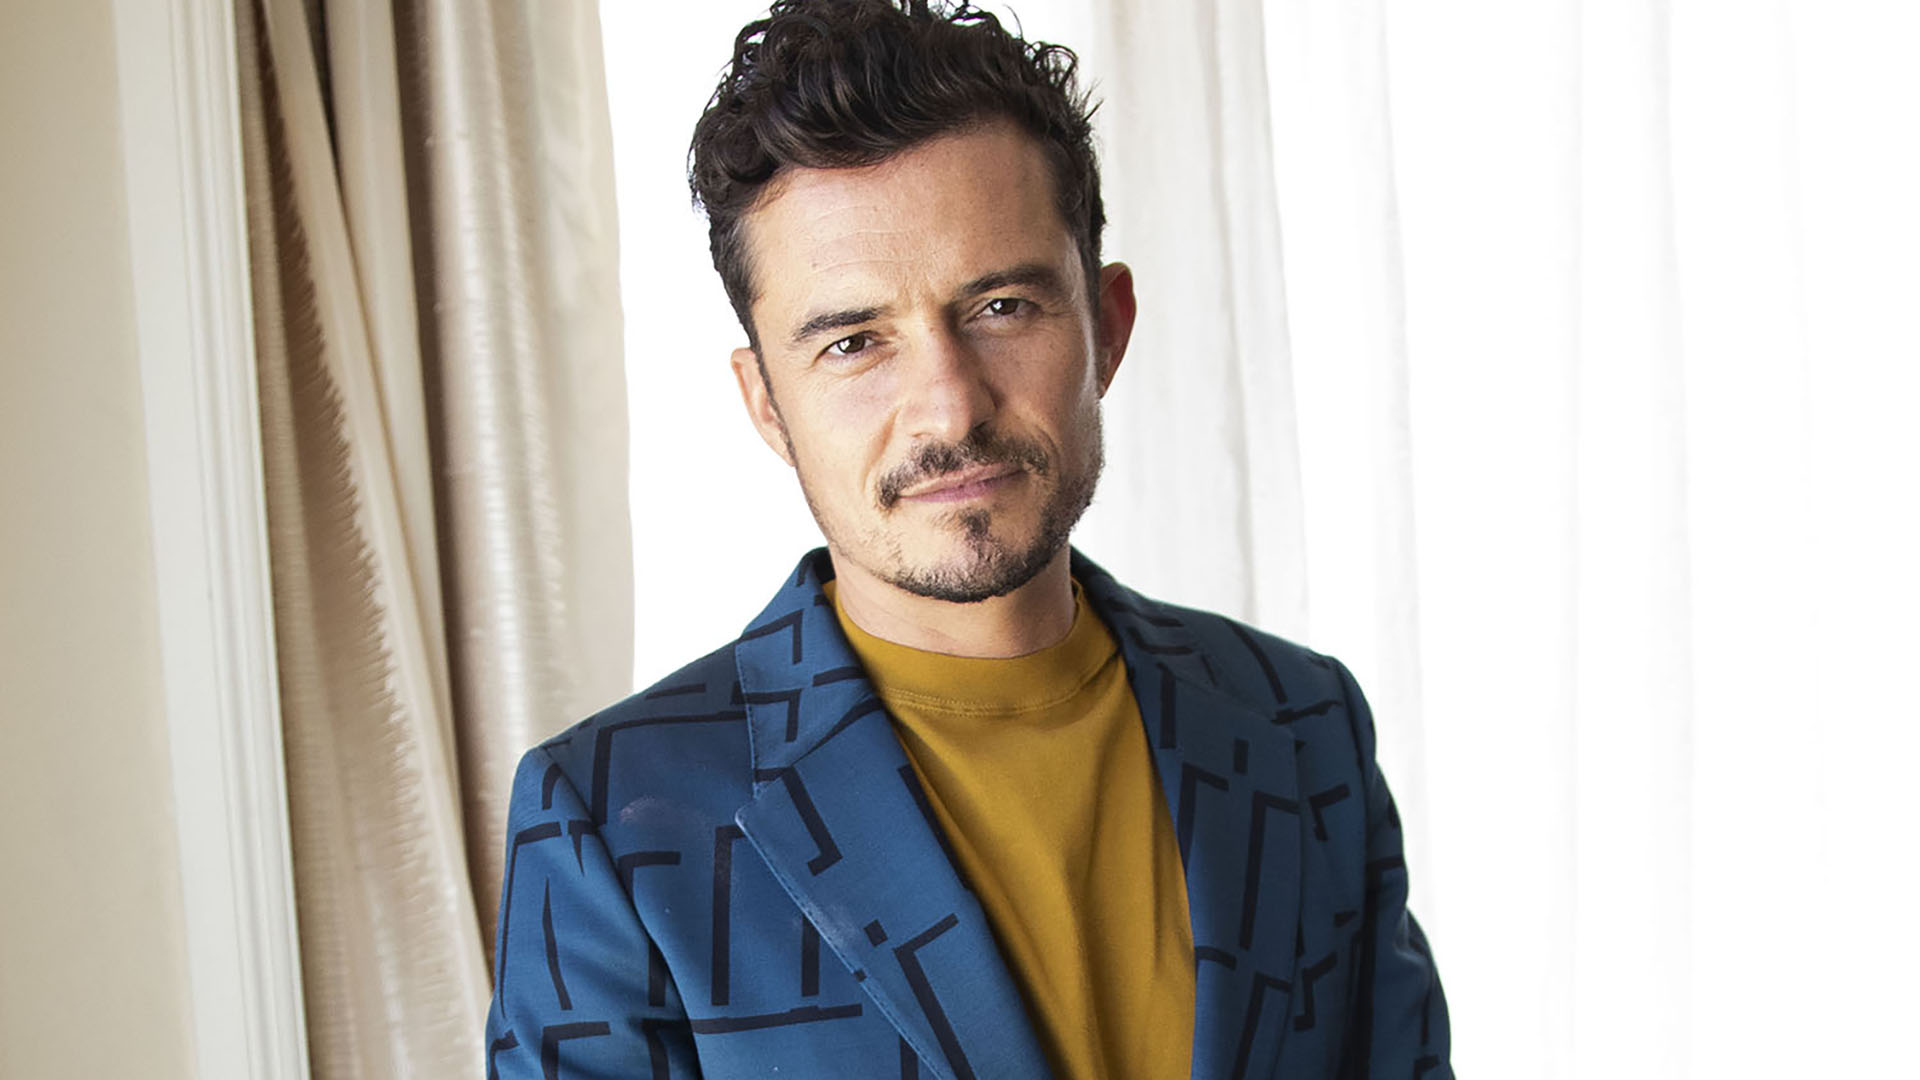 Orlando Bloom: 'You can't take fame too seriously' - The Big Issue